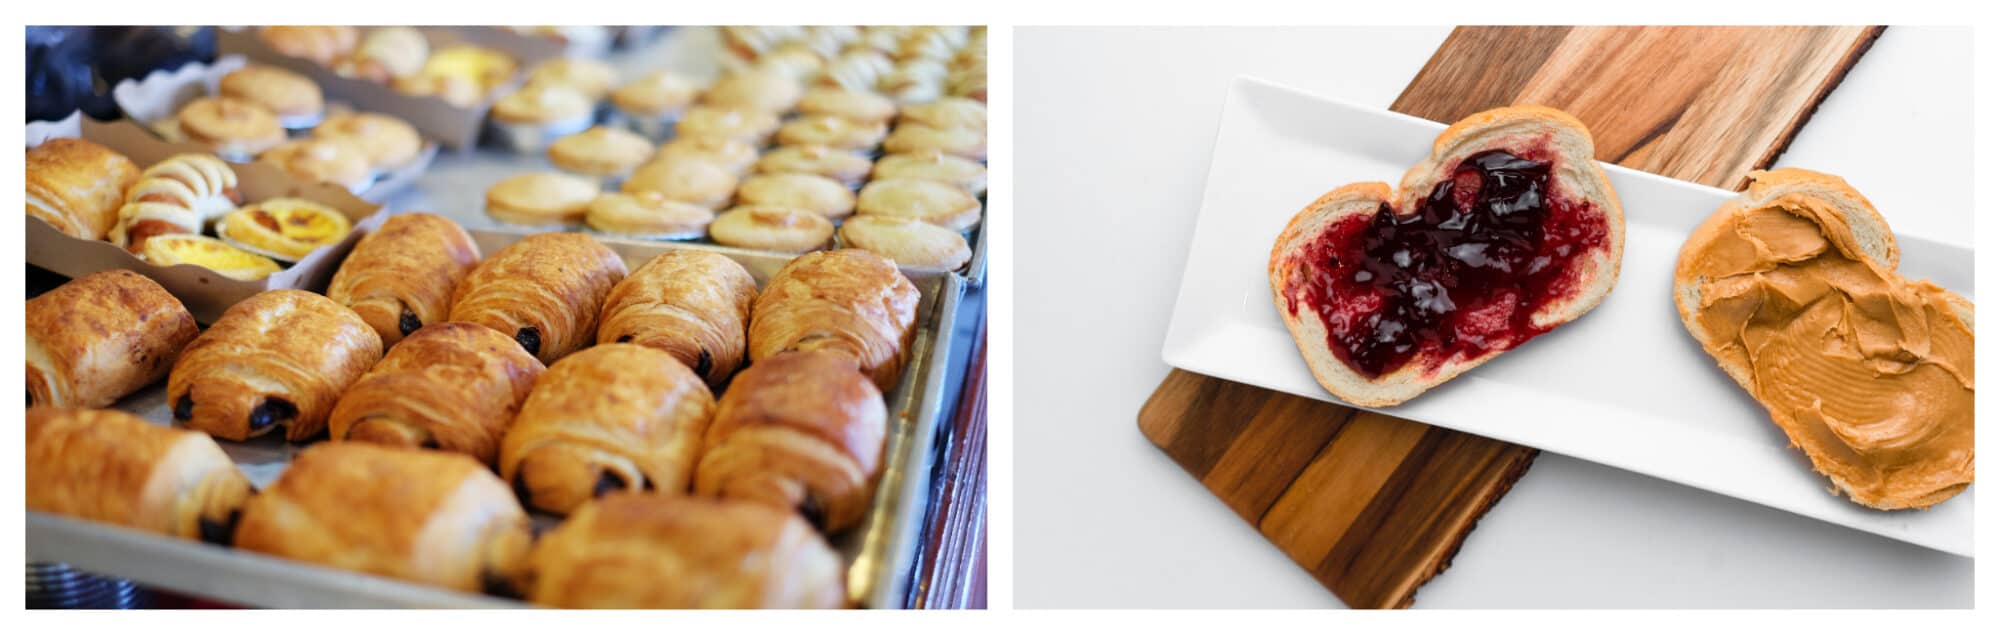 Left: a tray of viennoiserie at a French bakery; right: a white platter with one of slice of bread with jam on it and another topped with peanut butter.